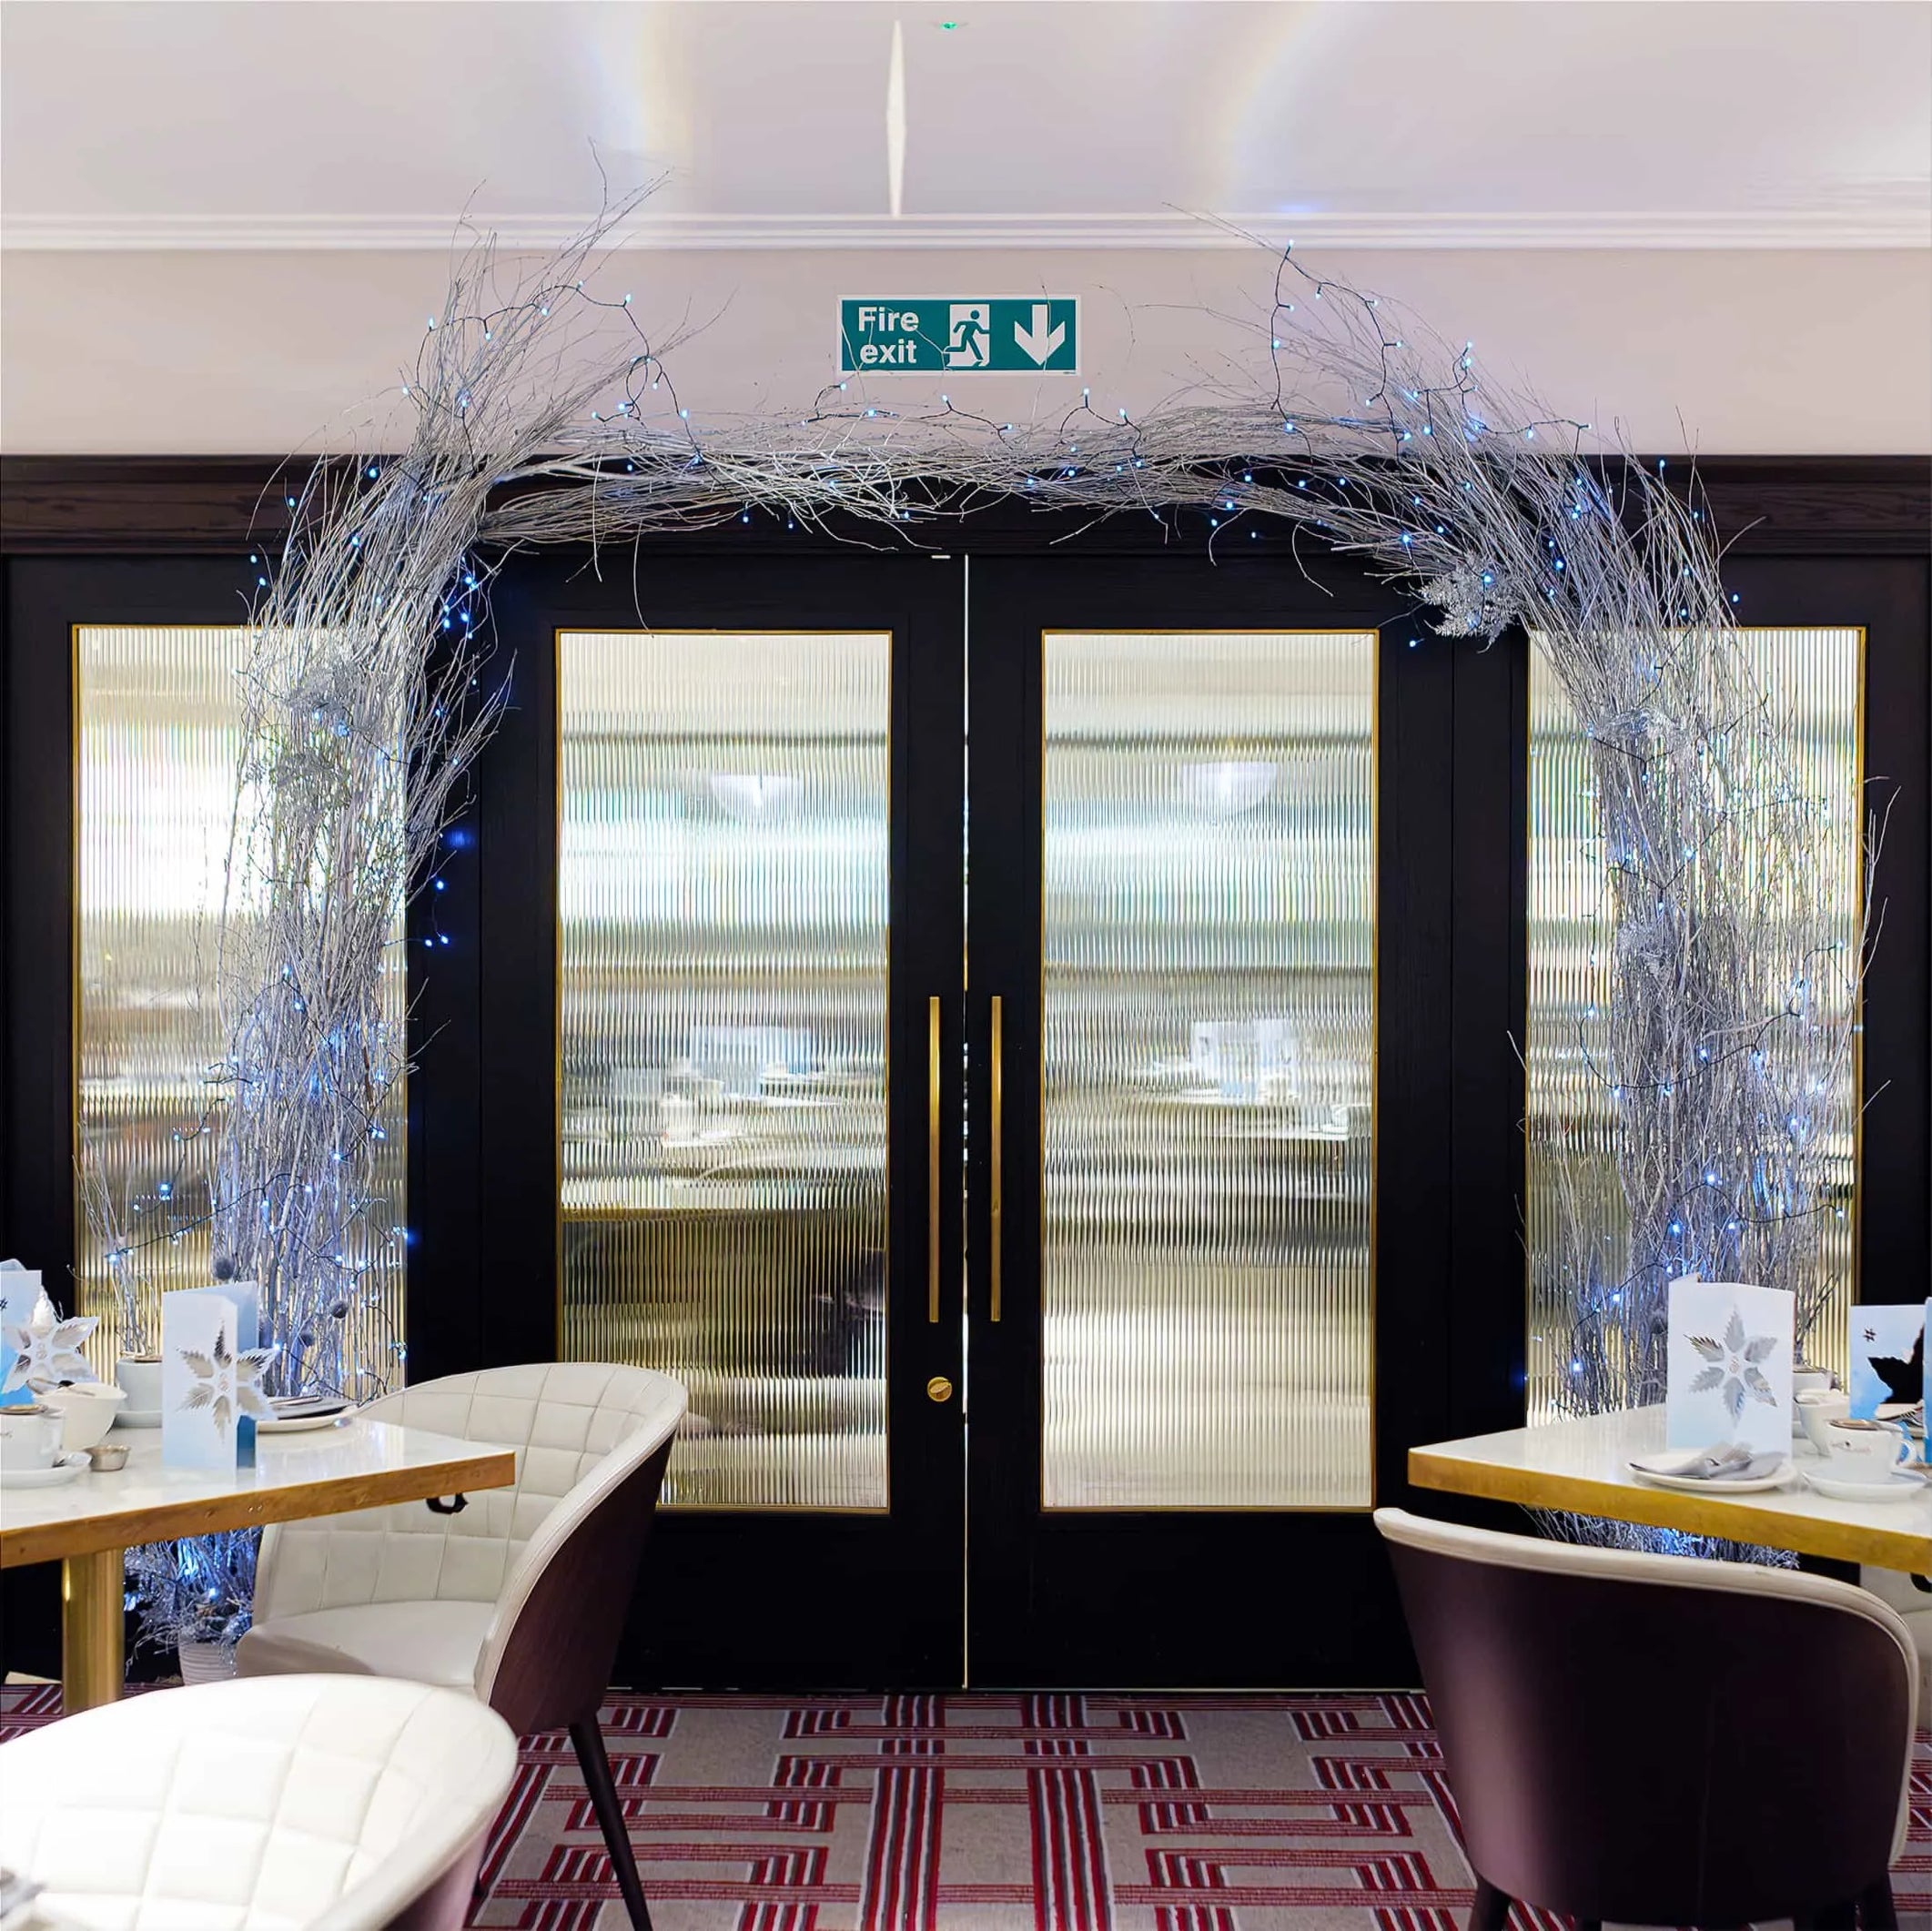 An elegant bespoke floral arch created by Event Florist Amaranté London frames the entrance to a dining area in the Strand Palace Hotel, featuring a lattice of silver branches sprinkled with twinkling lights, adding a festive and sophisticated atmosphere. The arch, set against the contrast of the rich maroon walls and the dark door, invites guests into the space, promising a cheerful and relaxing dining experience during the Christmas holidays.